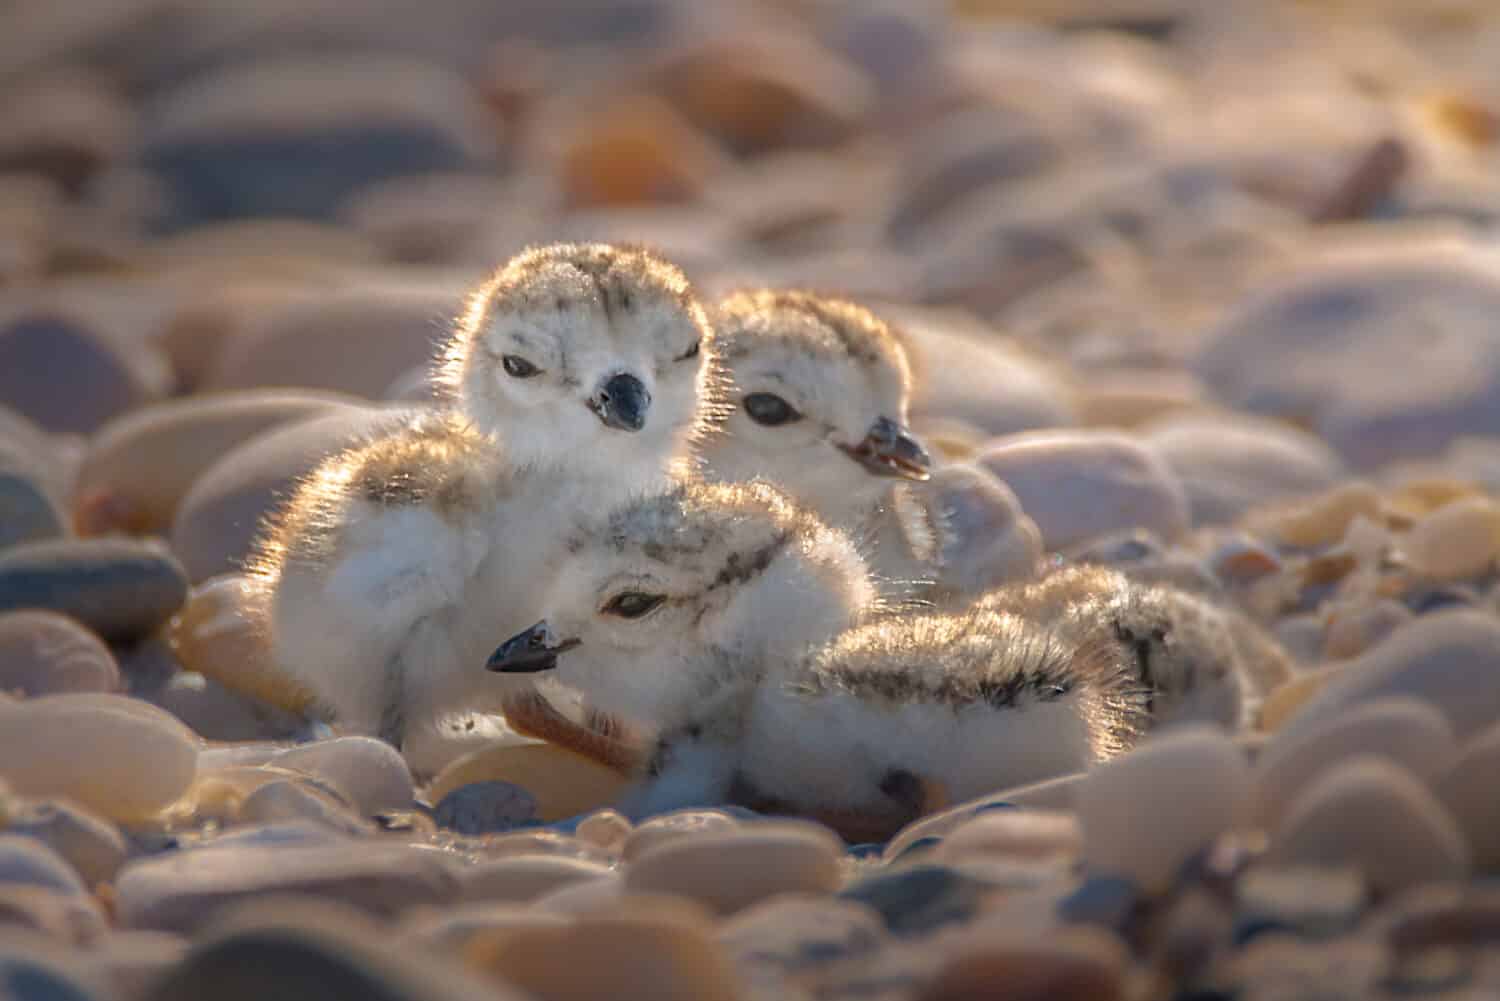 Four beautiful babies of piping plover (Charadrius melodus) are close together and  surrounded by pebbles on a beach during sunset.